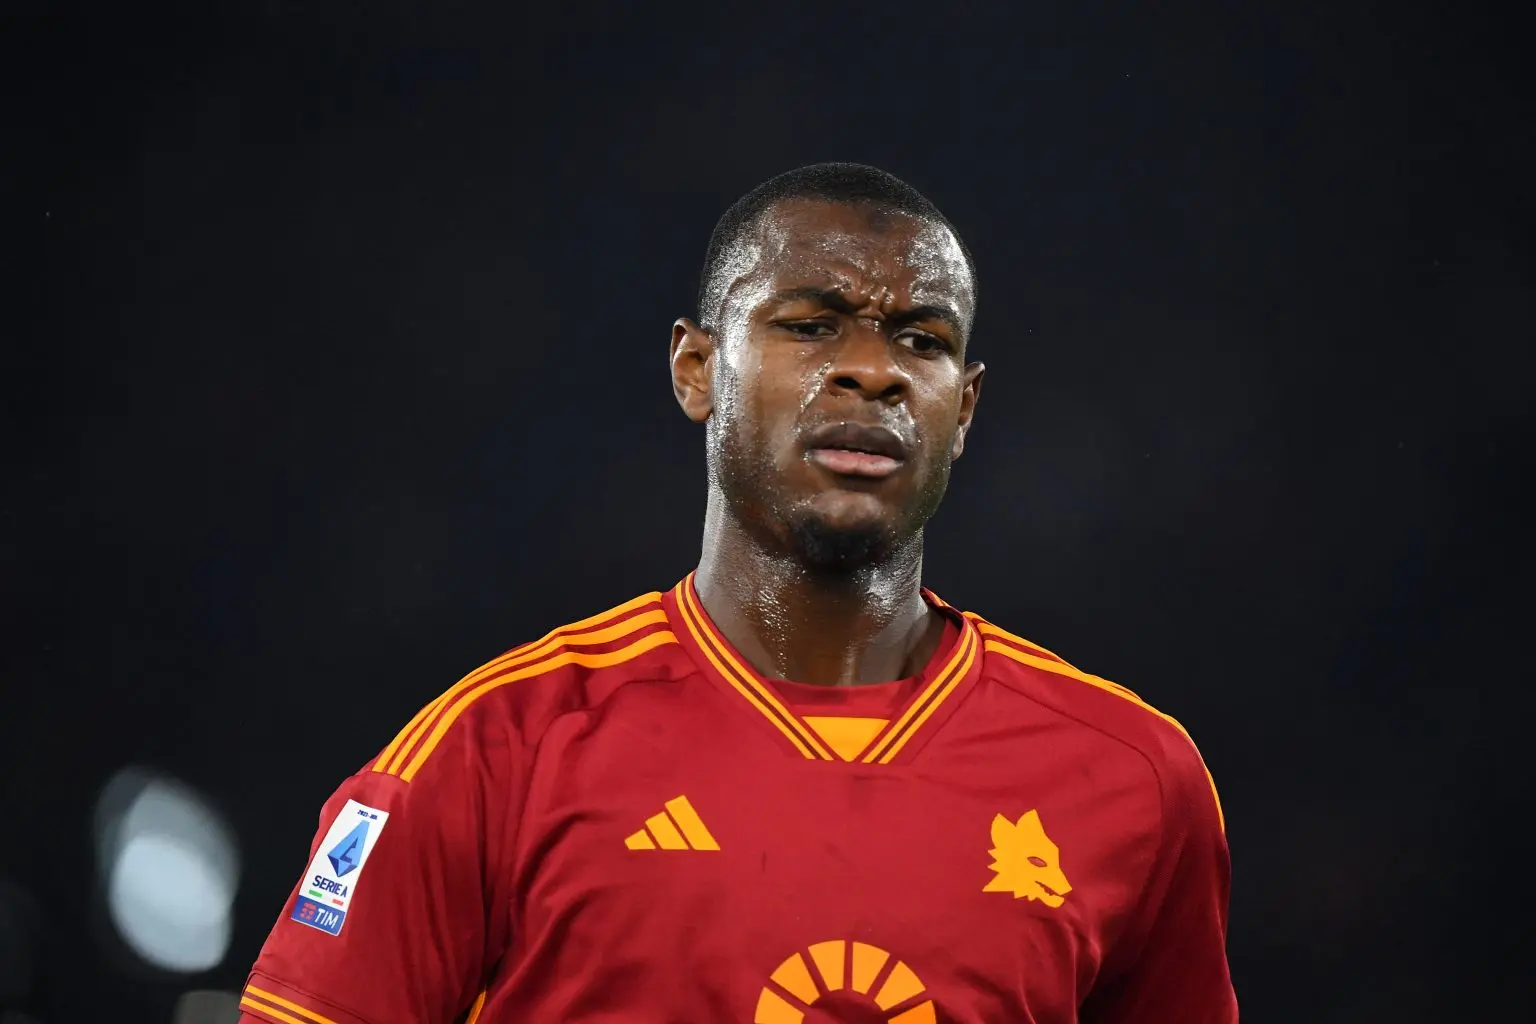 Roma defender Evan Ndicka is “doing well” after collapsing on the pitch during last weekend’s Serie A game with Udinese, his coach Daniele De Rossi said on Wednesday.